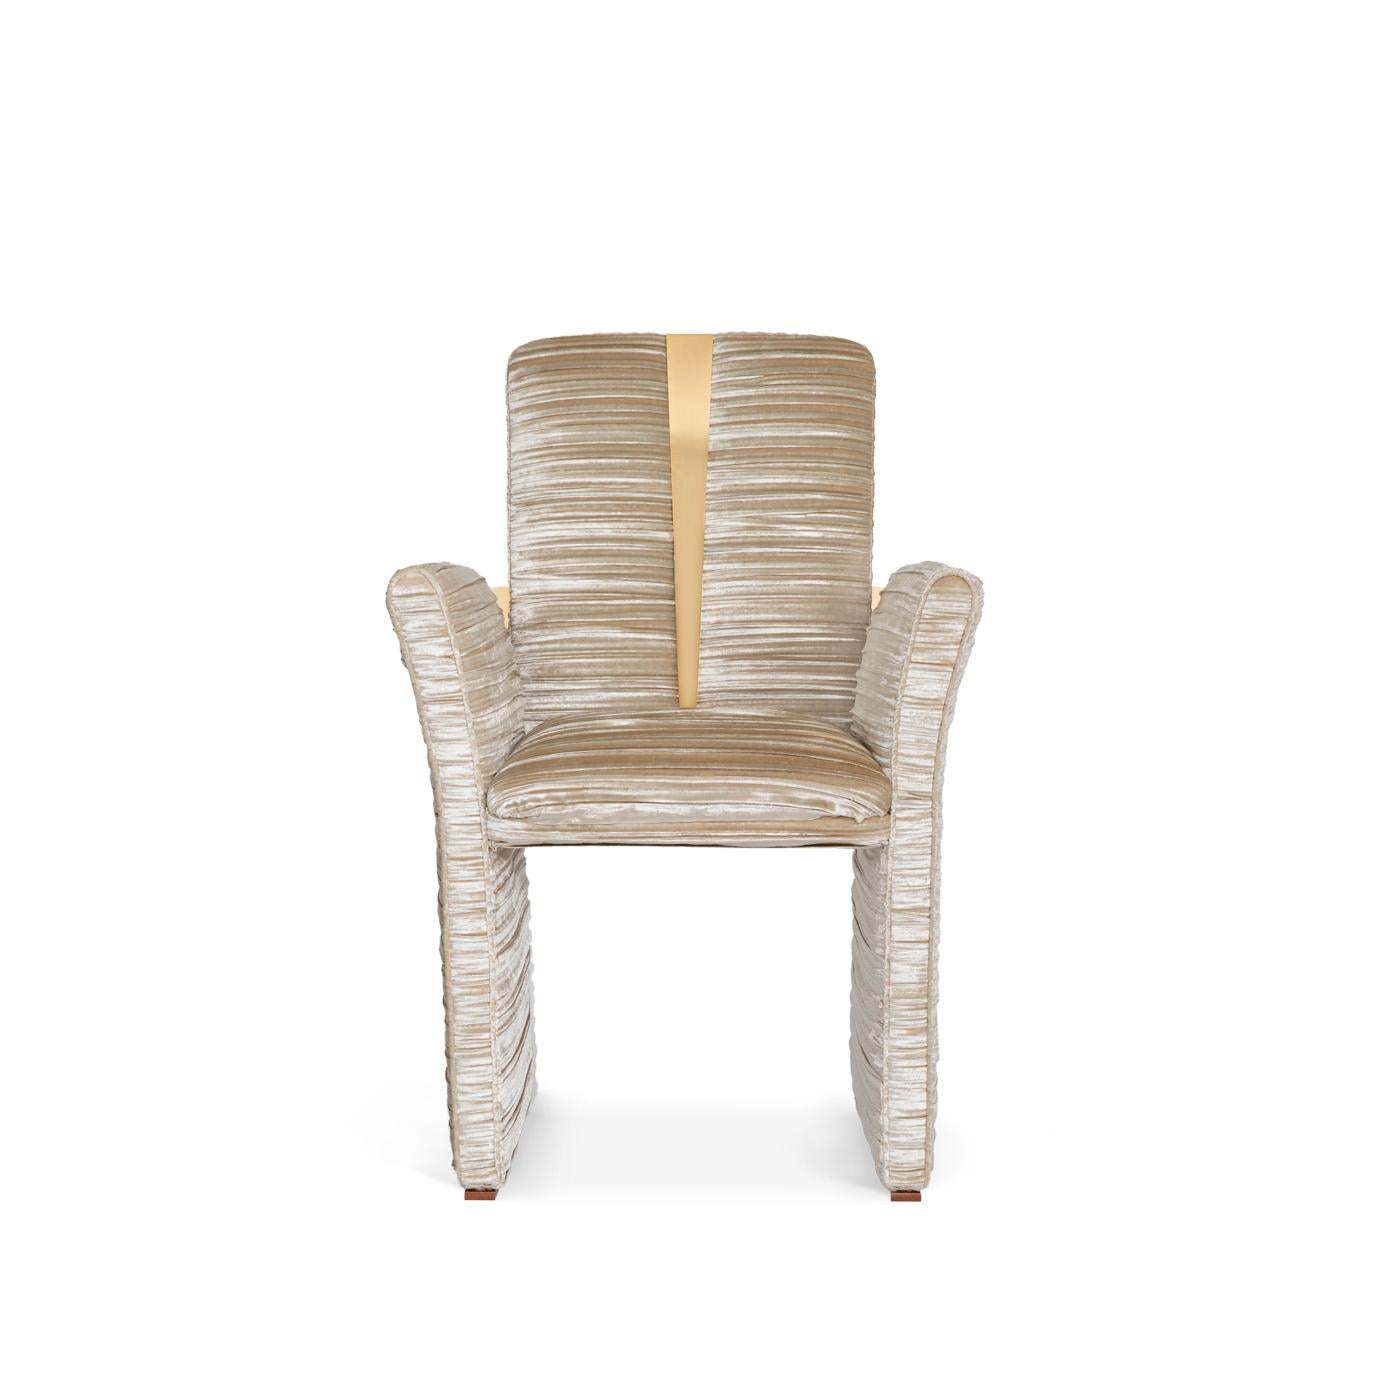 Perfectly tailored and draped as a delicate Kimono would wrap a woman, the Estelle dining chair brings statement design to any dining room. Upholster it in your favorite color to coordinate with the chair’s sleek brass details for a look that is